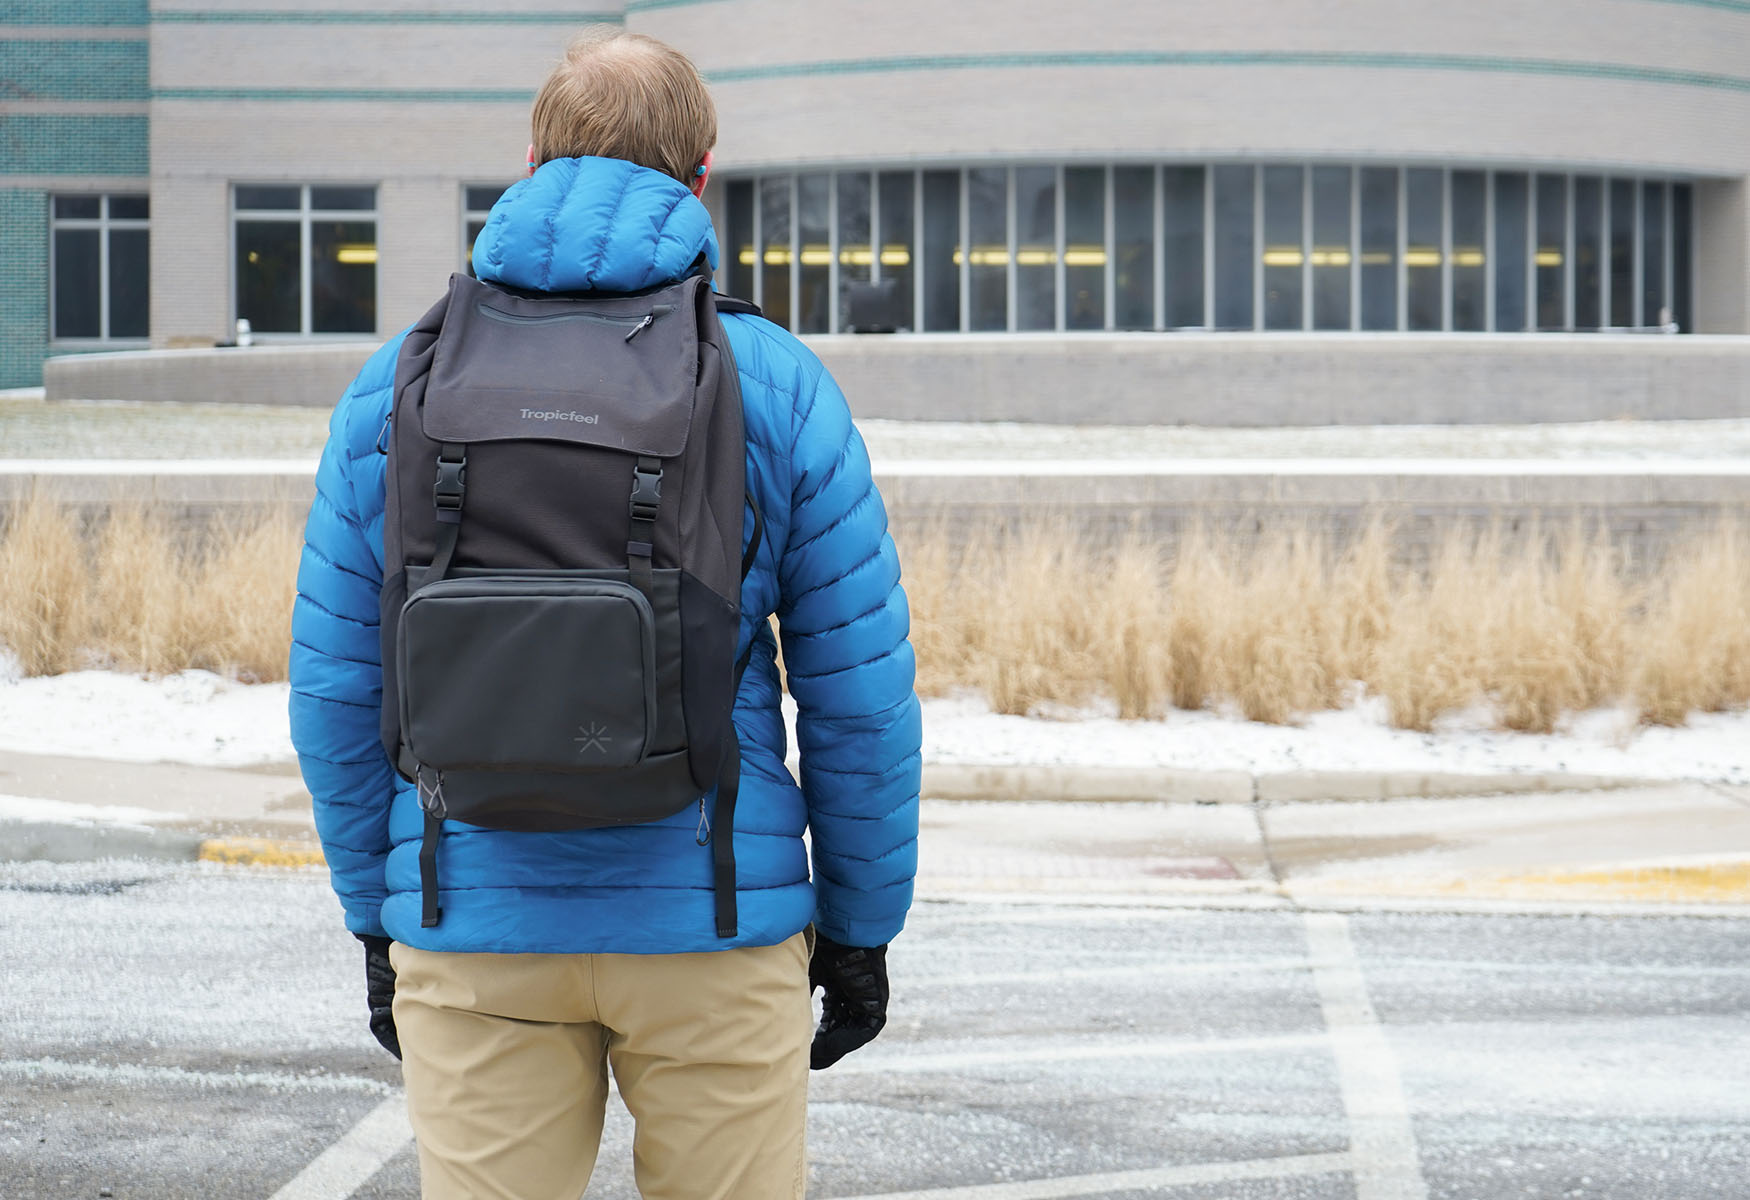 The Shell Backpack By Tropicfeel – INSIDER Review